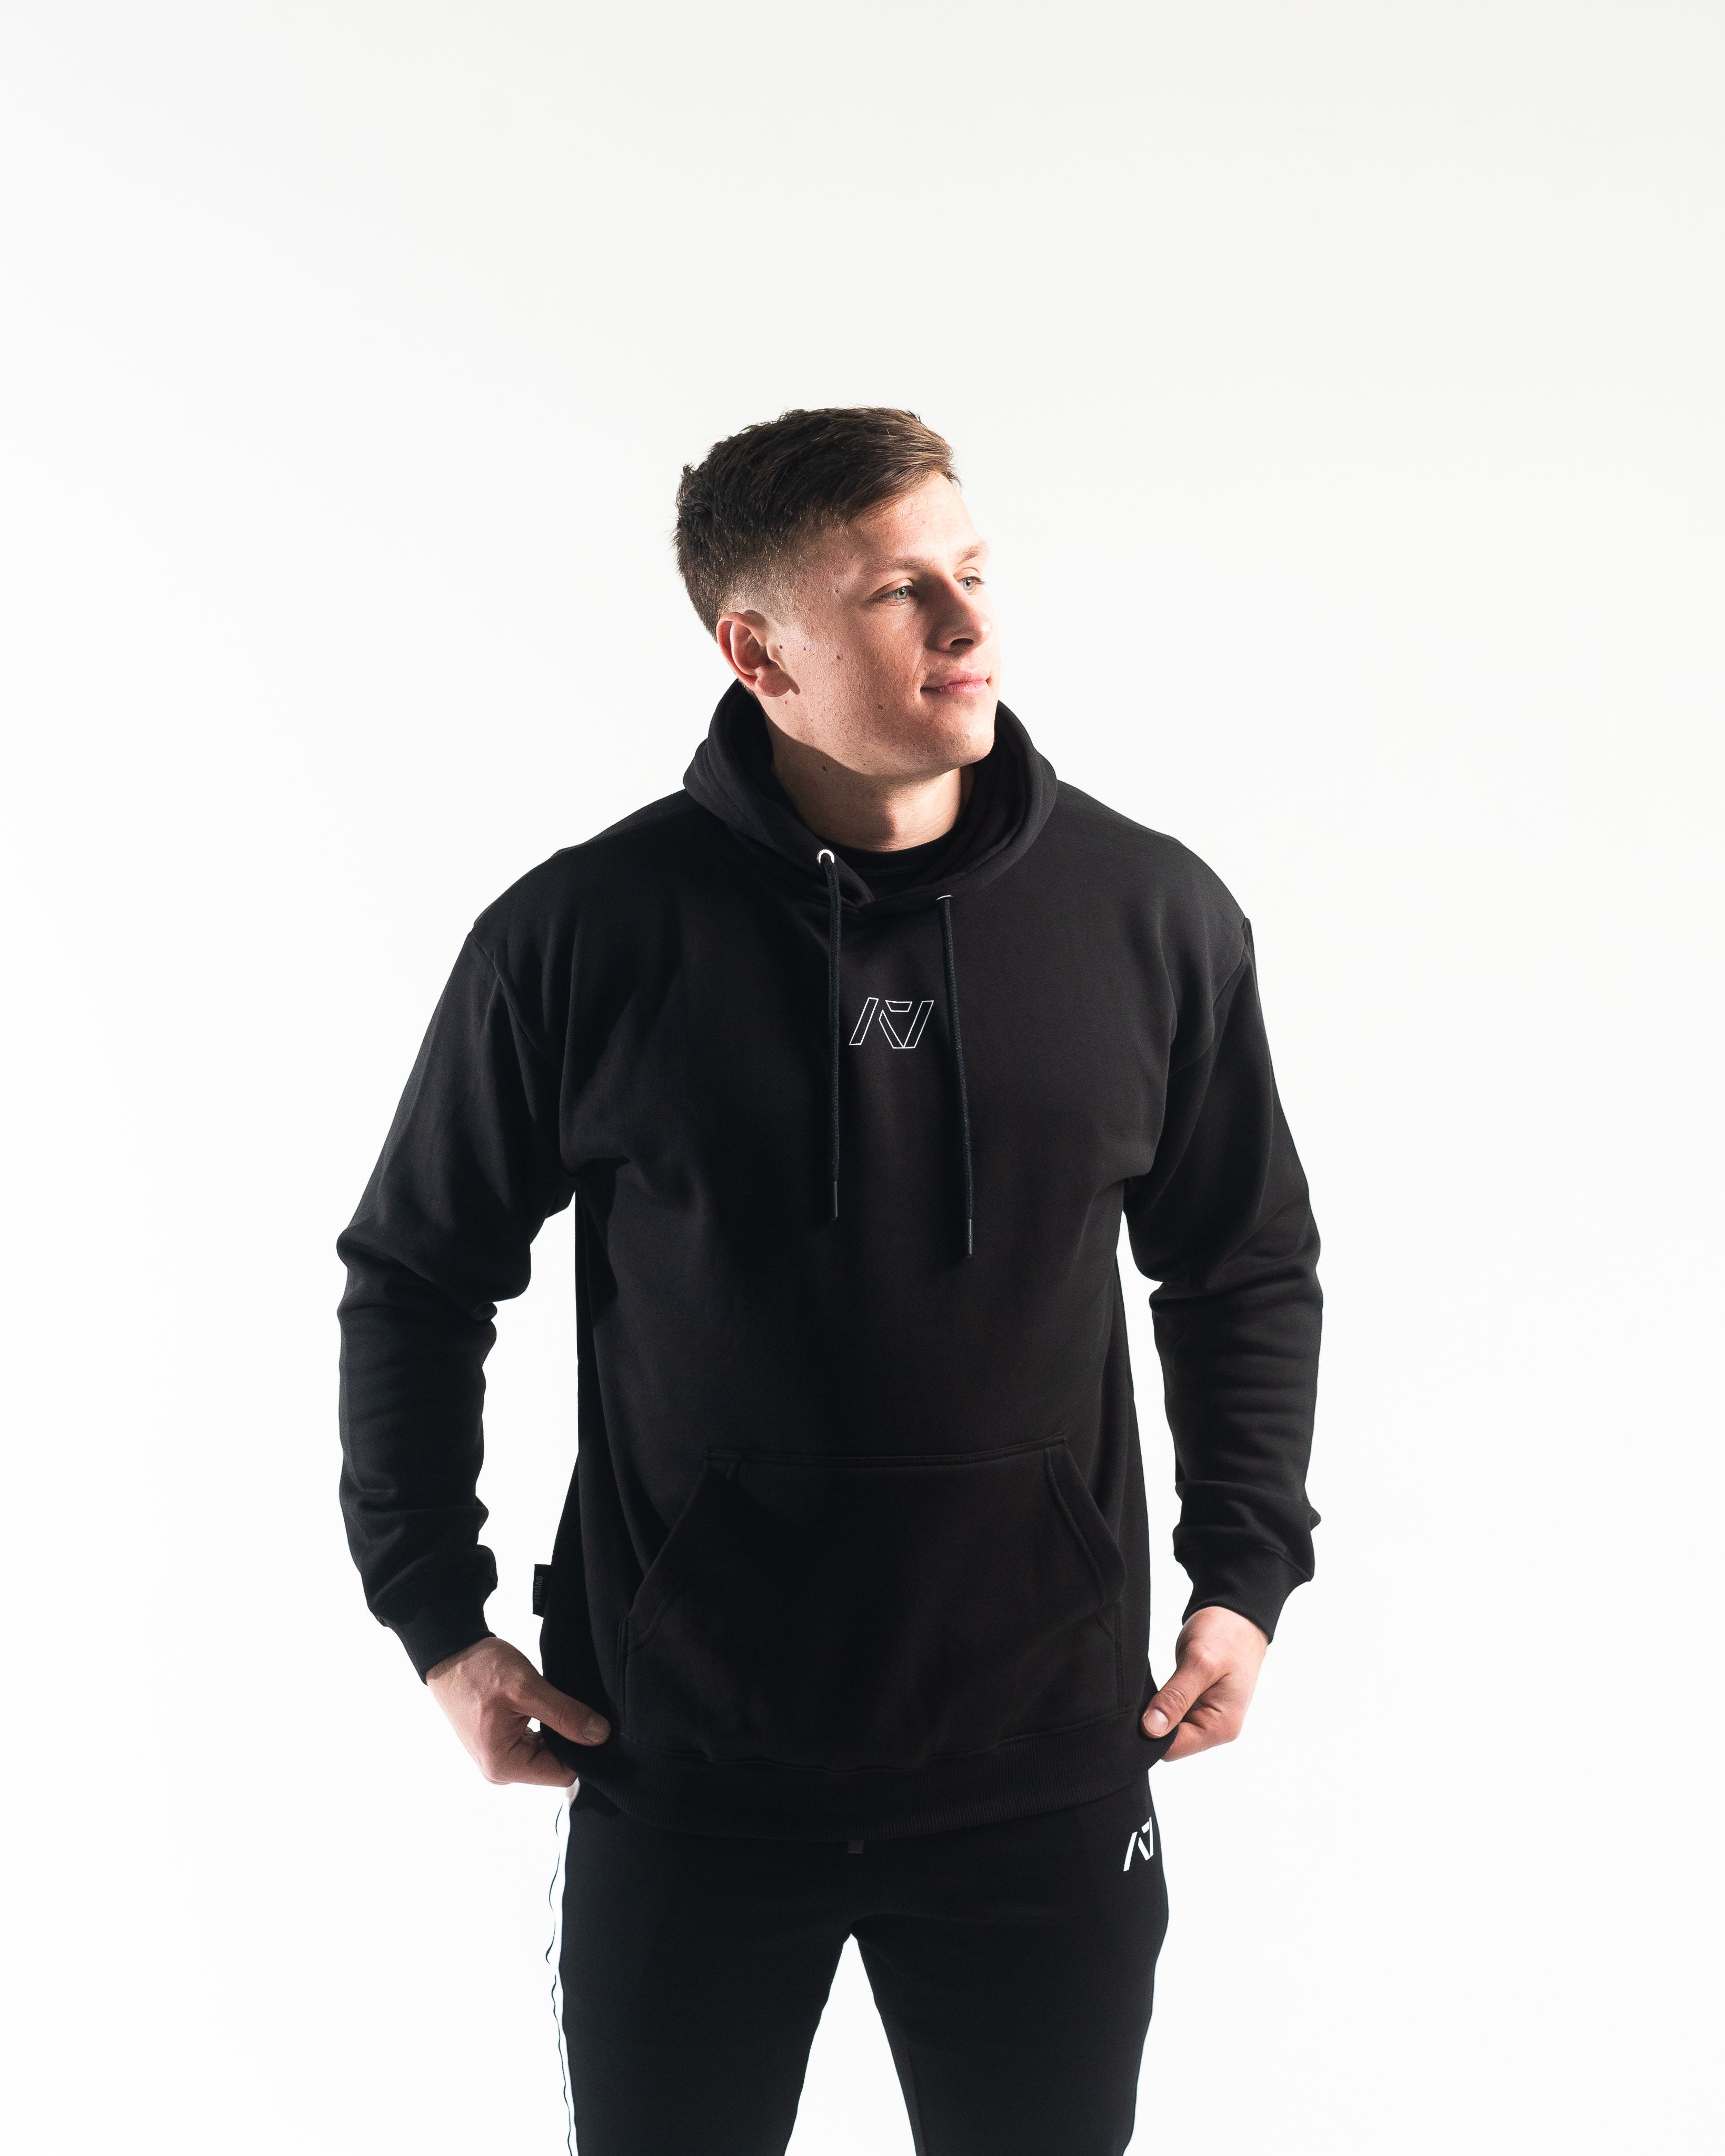 A7 Domino hoodie combines comfort and aesthetics. Purchase A7 Domino Hoodie from A7UK, shipping to UK, Norway, Swizerland, Iceland.